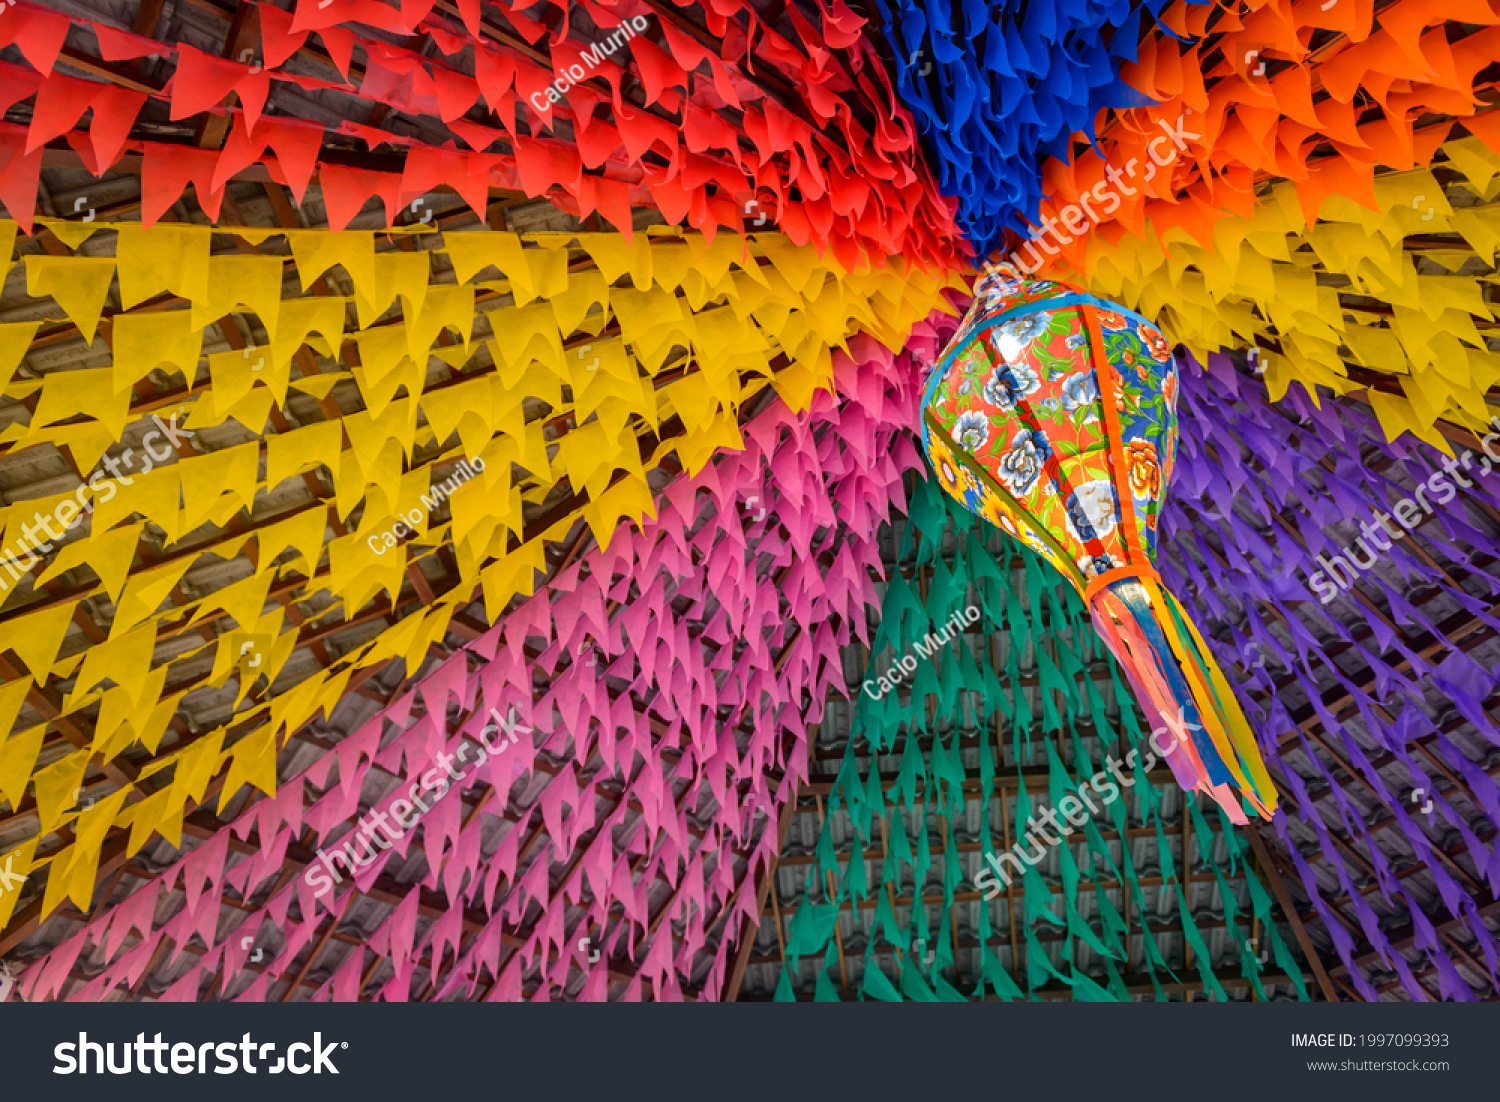 Colorful flags and decorative balloon for the Saint John party, which takes place in June in northeastern Brazil. #1997099393